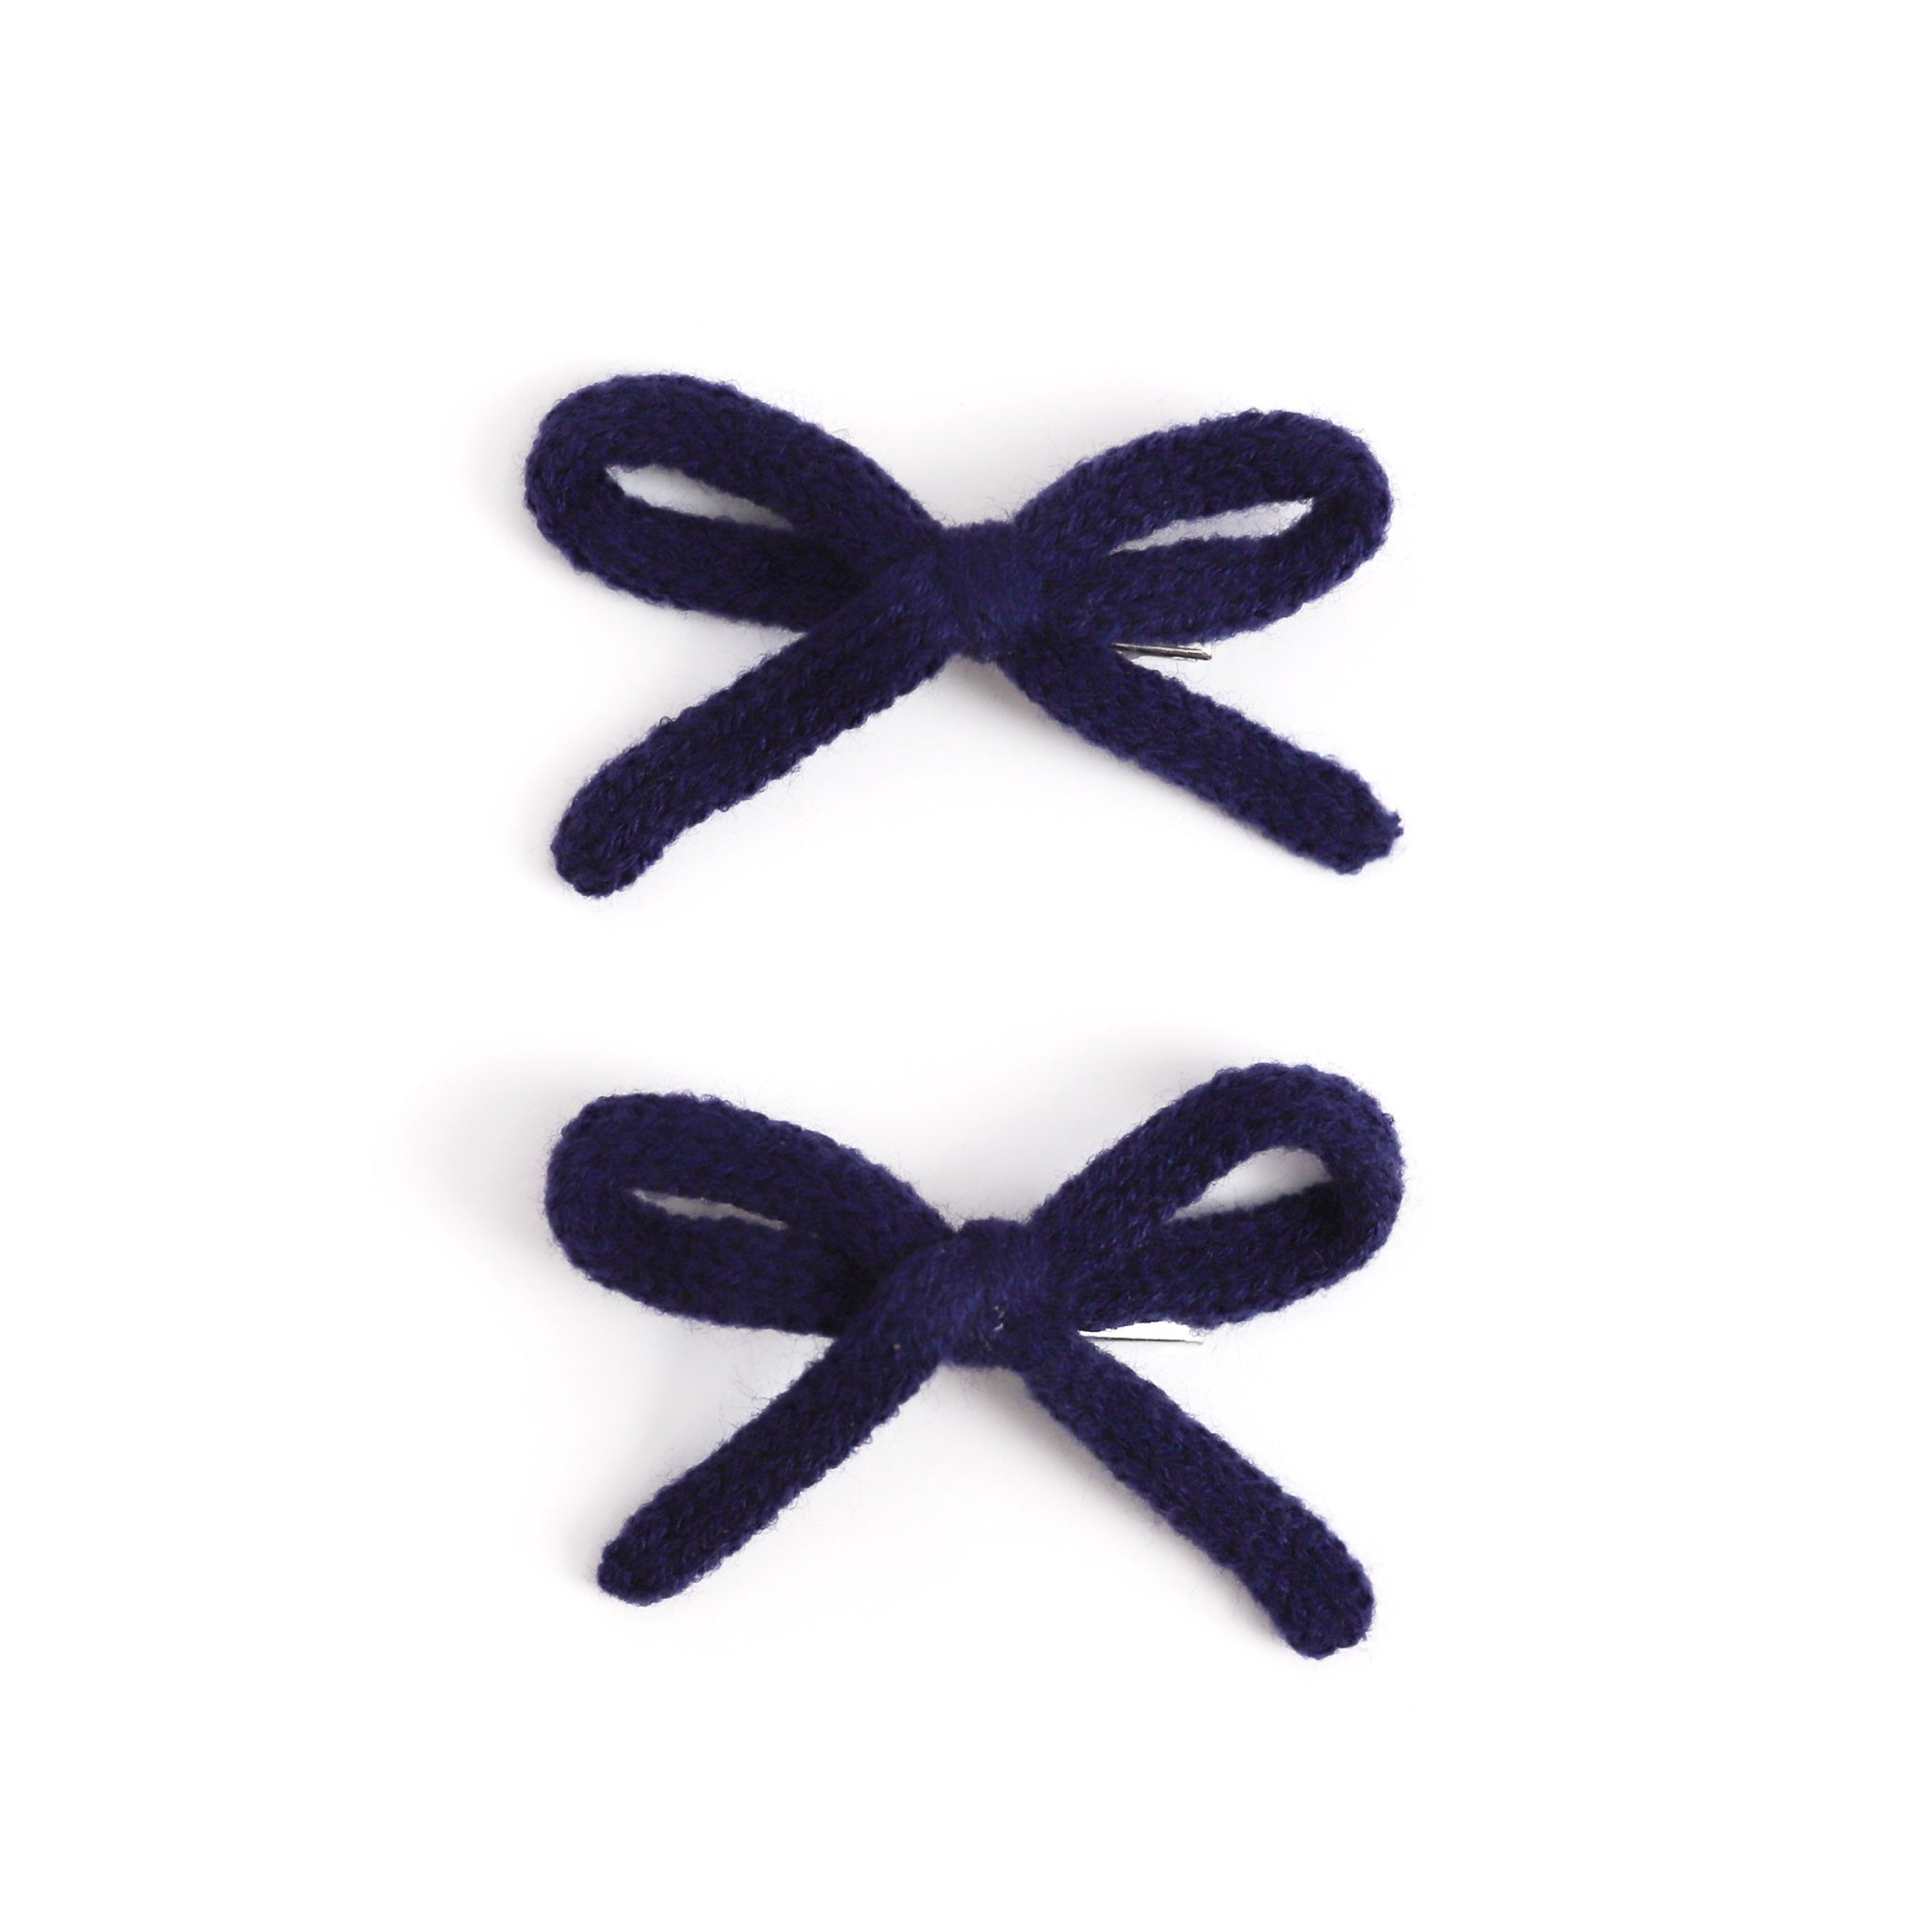 girls' back to school yarn pigtail bow clips in navy blue